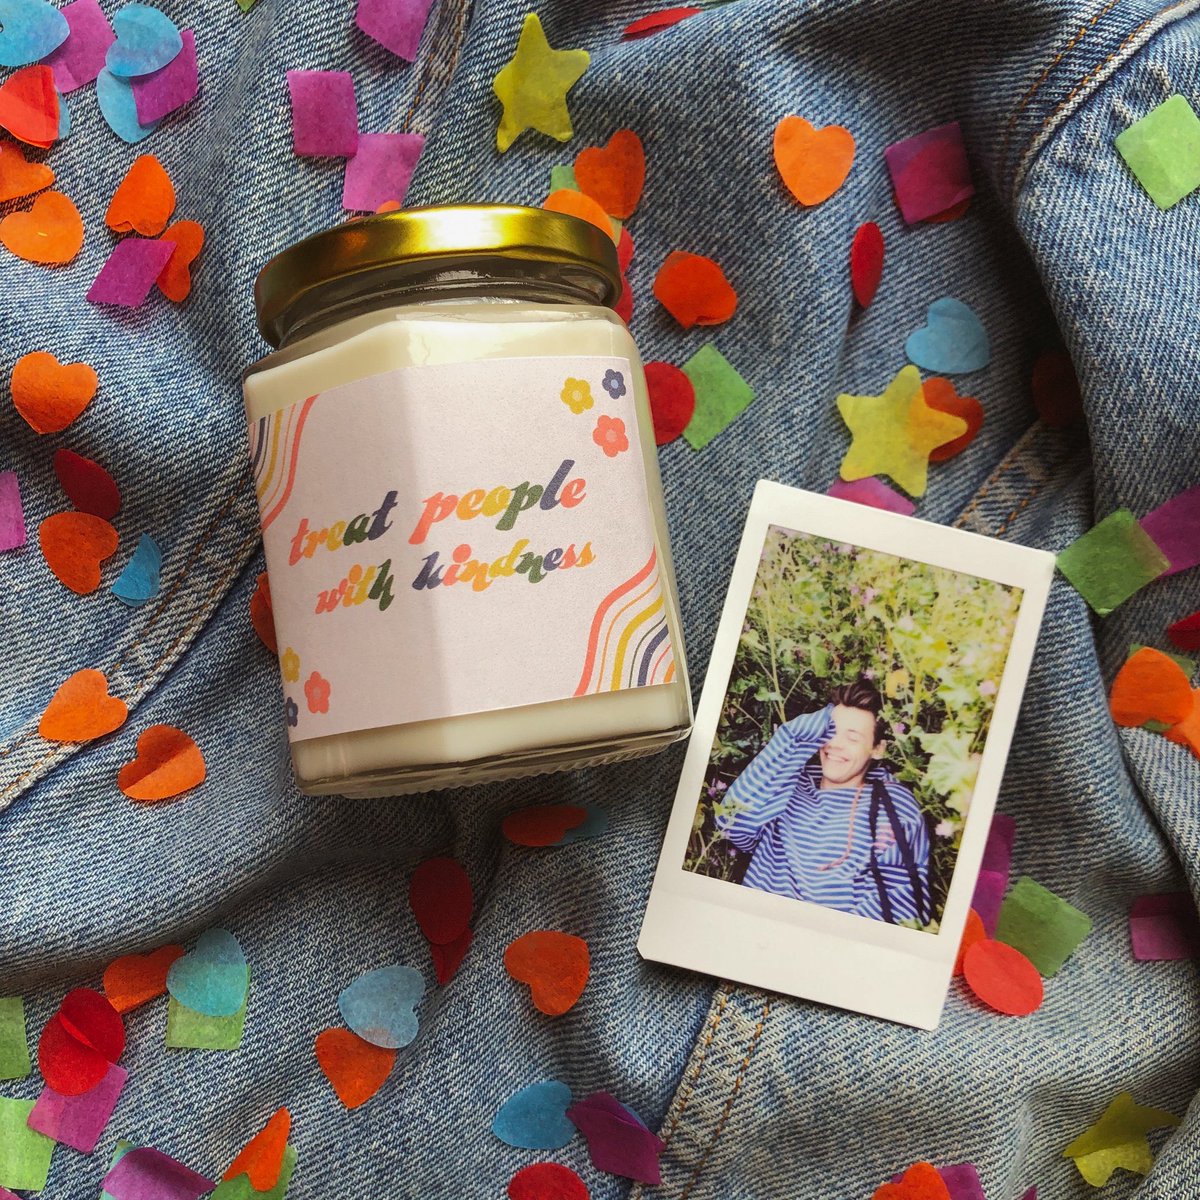 . @youremymylover Alison & Destiny run  http://burningredcandles.etsy.com  which is full of candles inspired by different artists (Taylor, Harry, & Lorde to name a few). They are 100% vegan, cruelty-free, and are handmade! Keep an eye out for their November drop, I definitely will be 